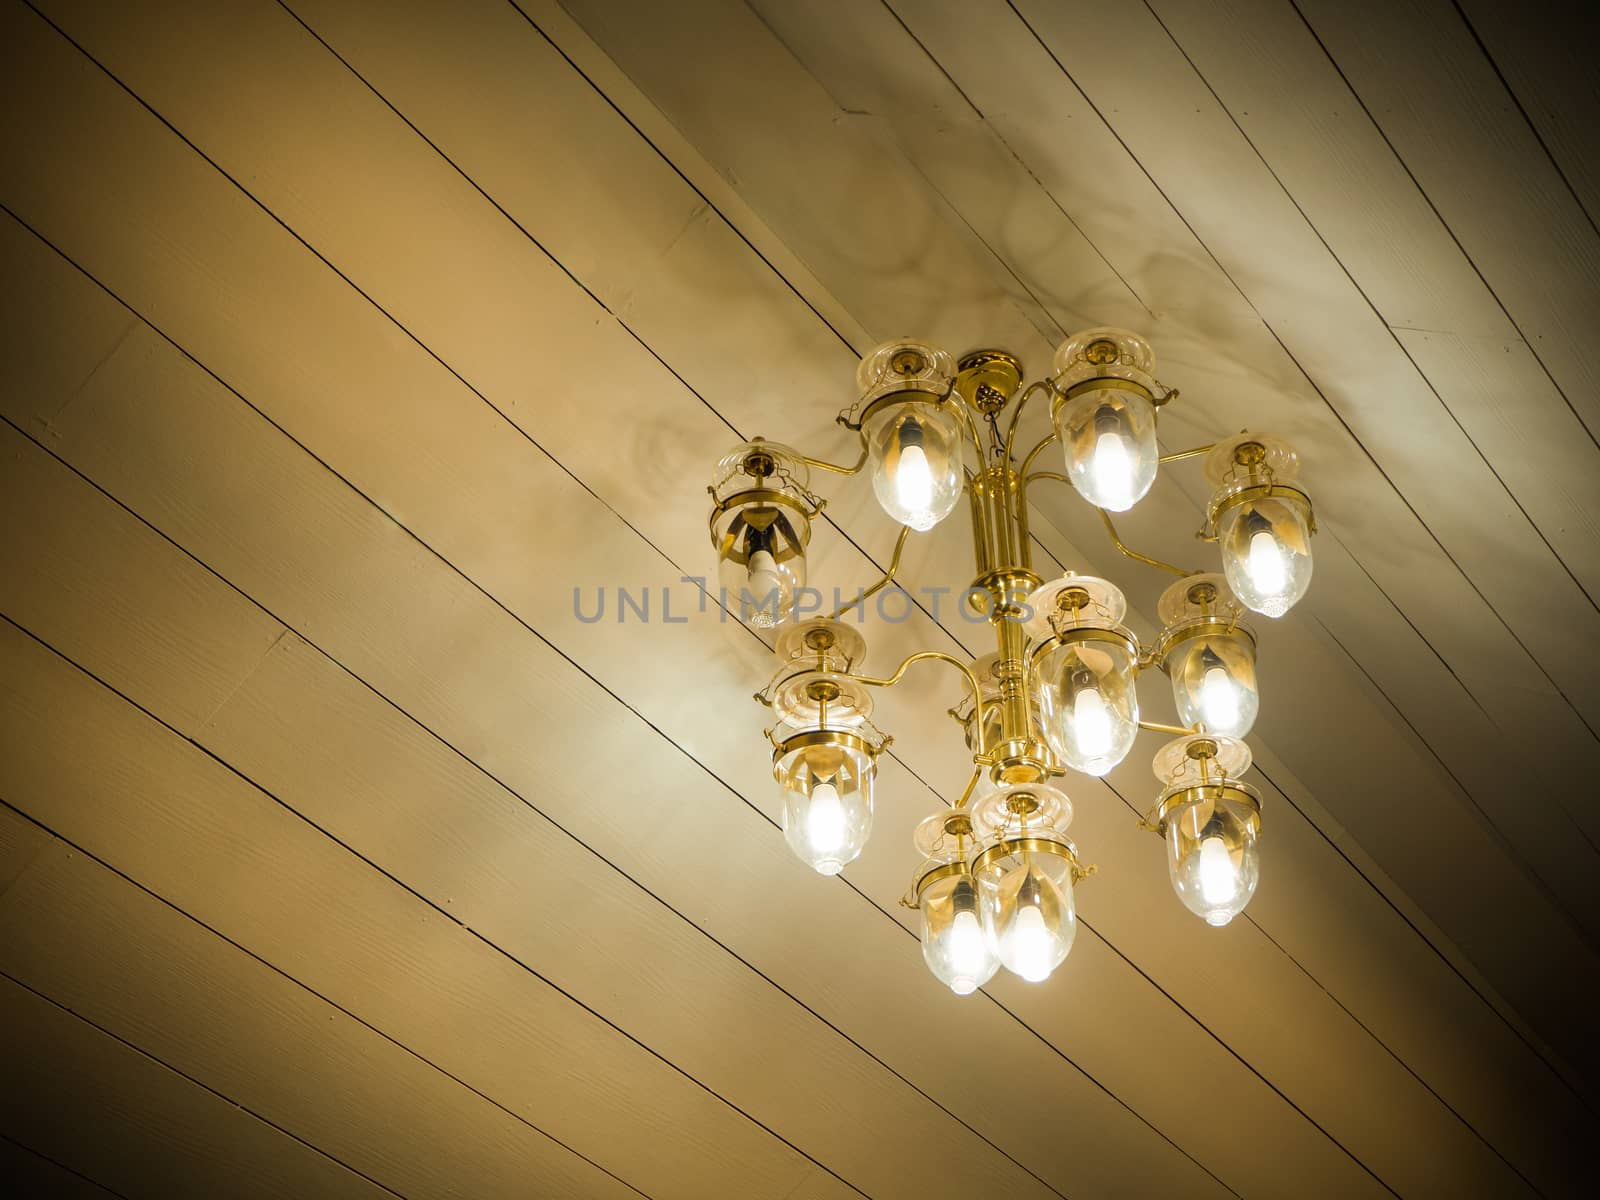 close up photo of chrystal chandelier lamp on the ceiling of a banquet hall